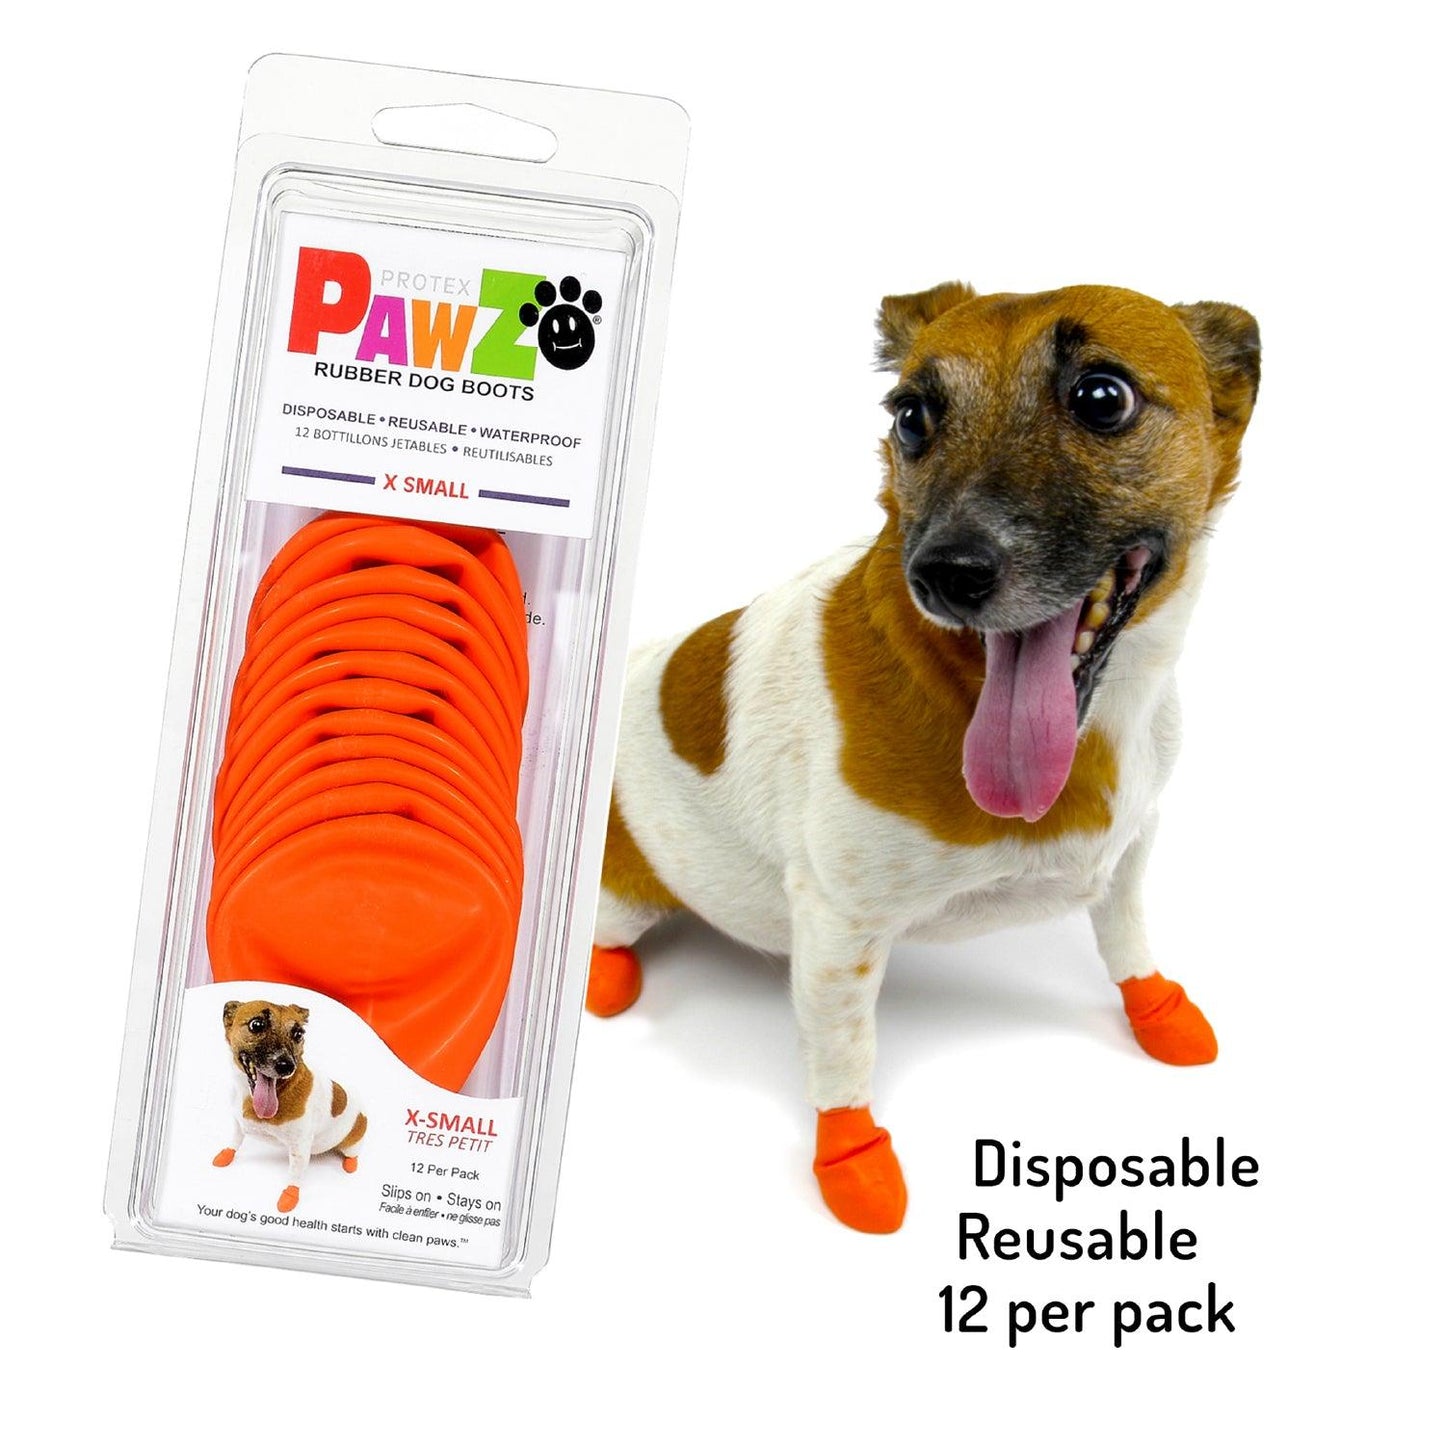 Jack Russell dog wearing Pawz extra small dog boots in orange